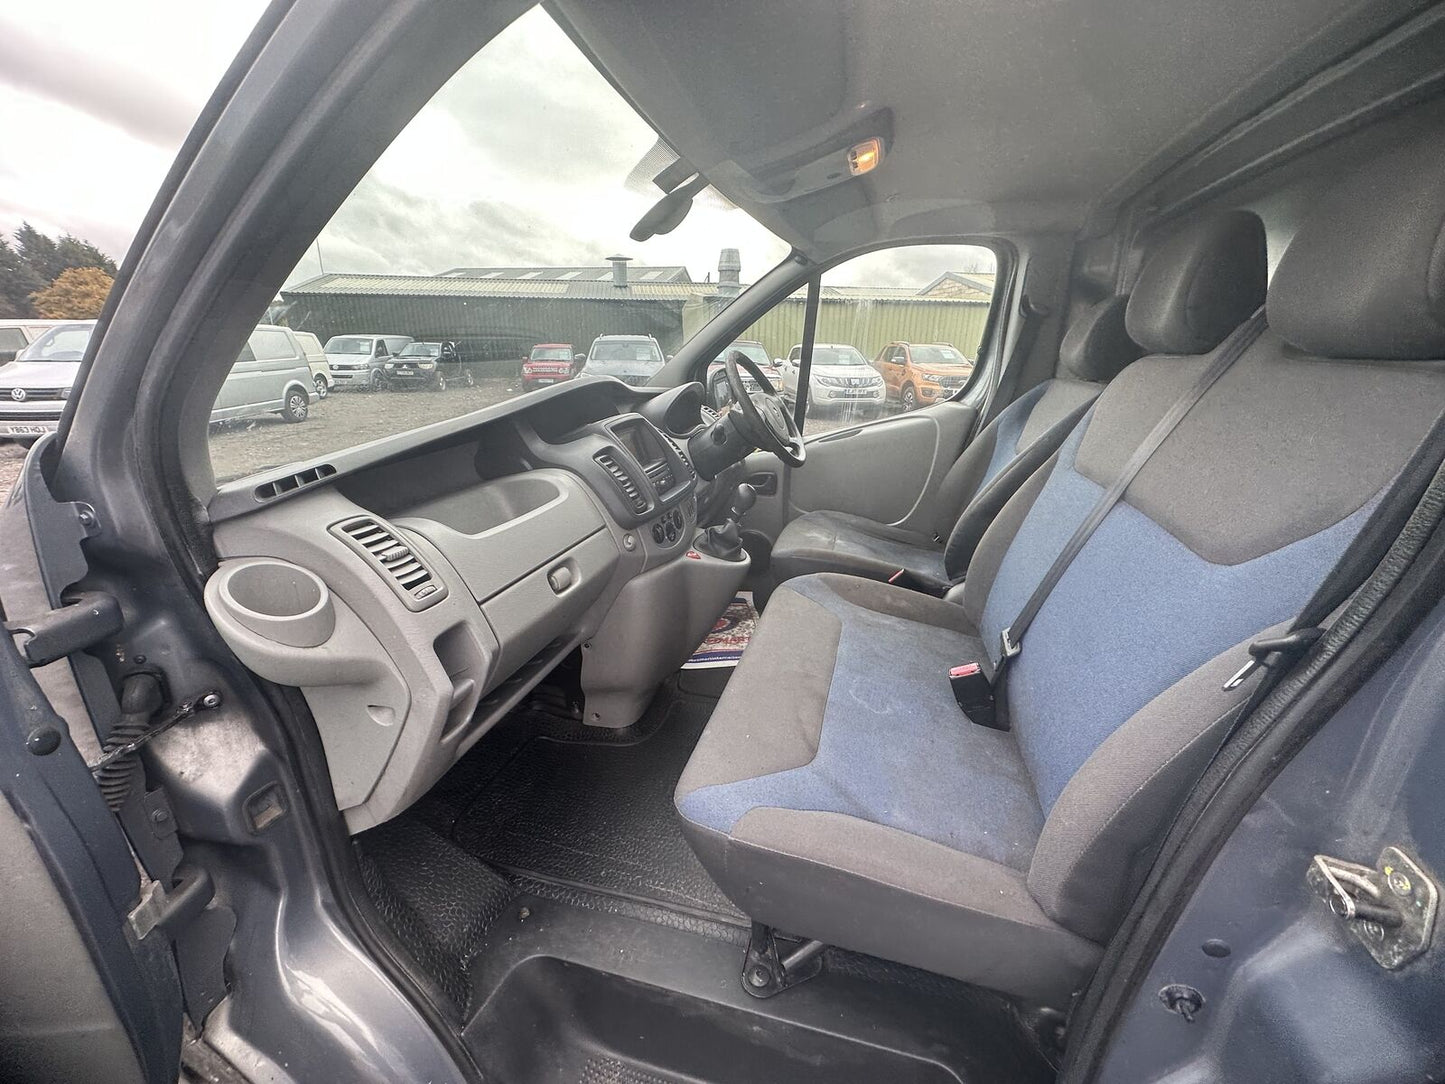 Bid on CRUISE IN STYLE: 1 FORMER KEEPER - THE RELIABLE RENAULT TRAFIC VIVARO - NO VAT ON HAMMER- Buy &amp; Sell on Auction with EAMA Group